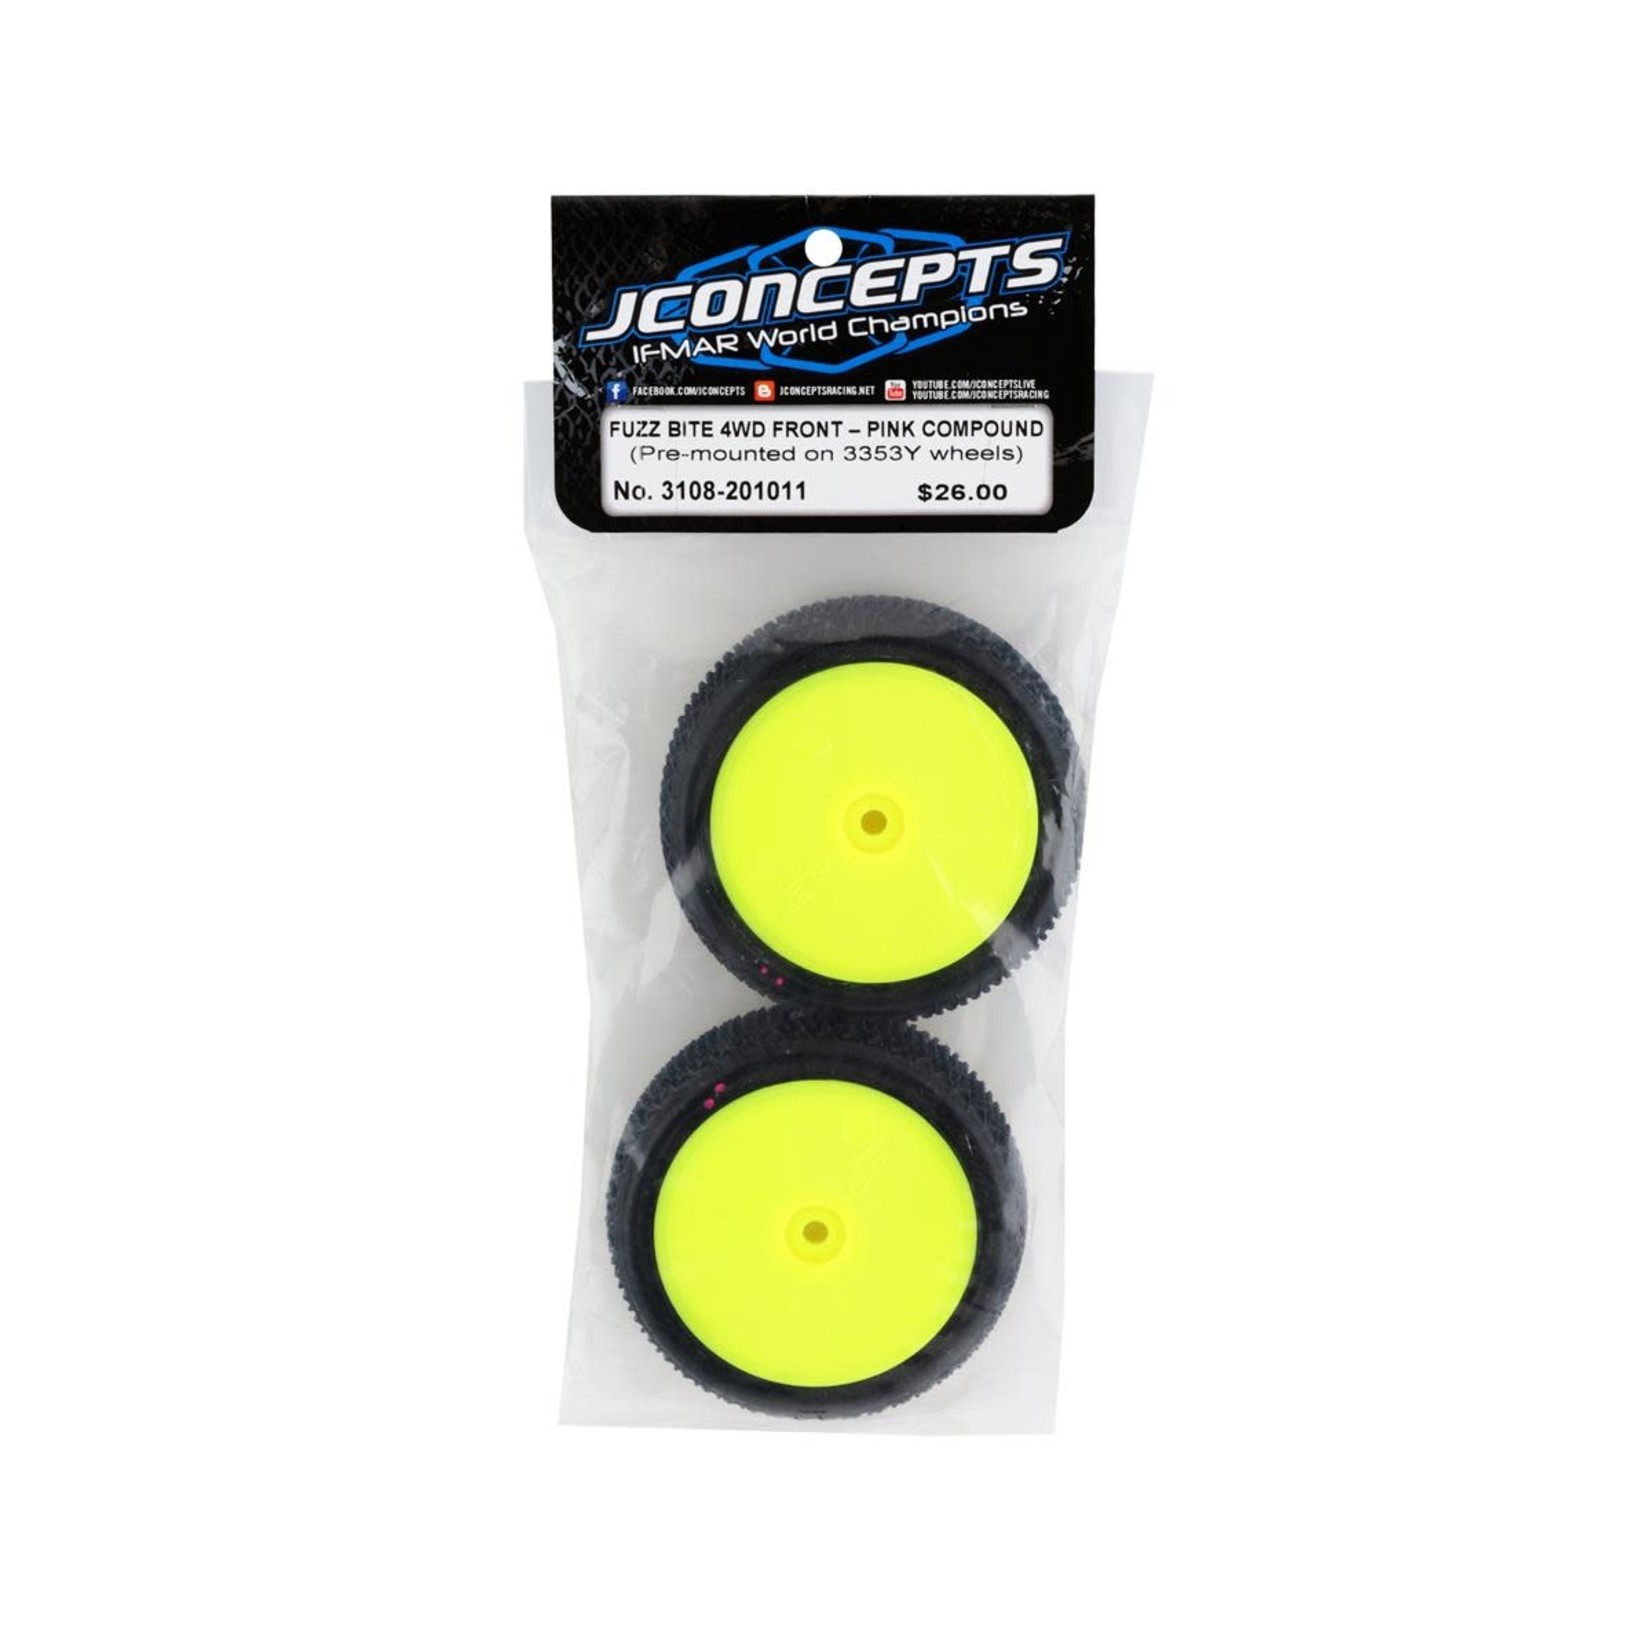 JConcepts JConcepts Fuzz Bite LP 2.2" Pre-Mounted 4WD Front Buggy Tire (Yellow) (2) (Pink) w/12mm Hex #3108-201011